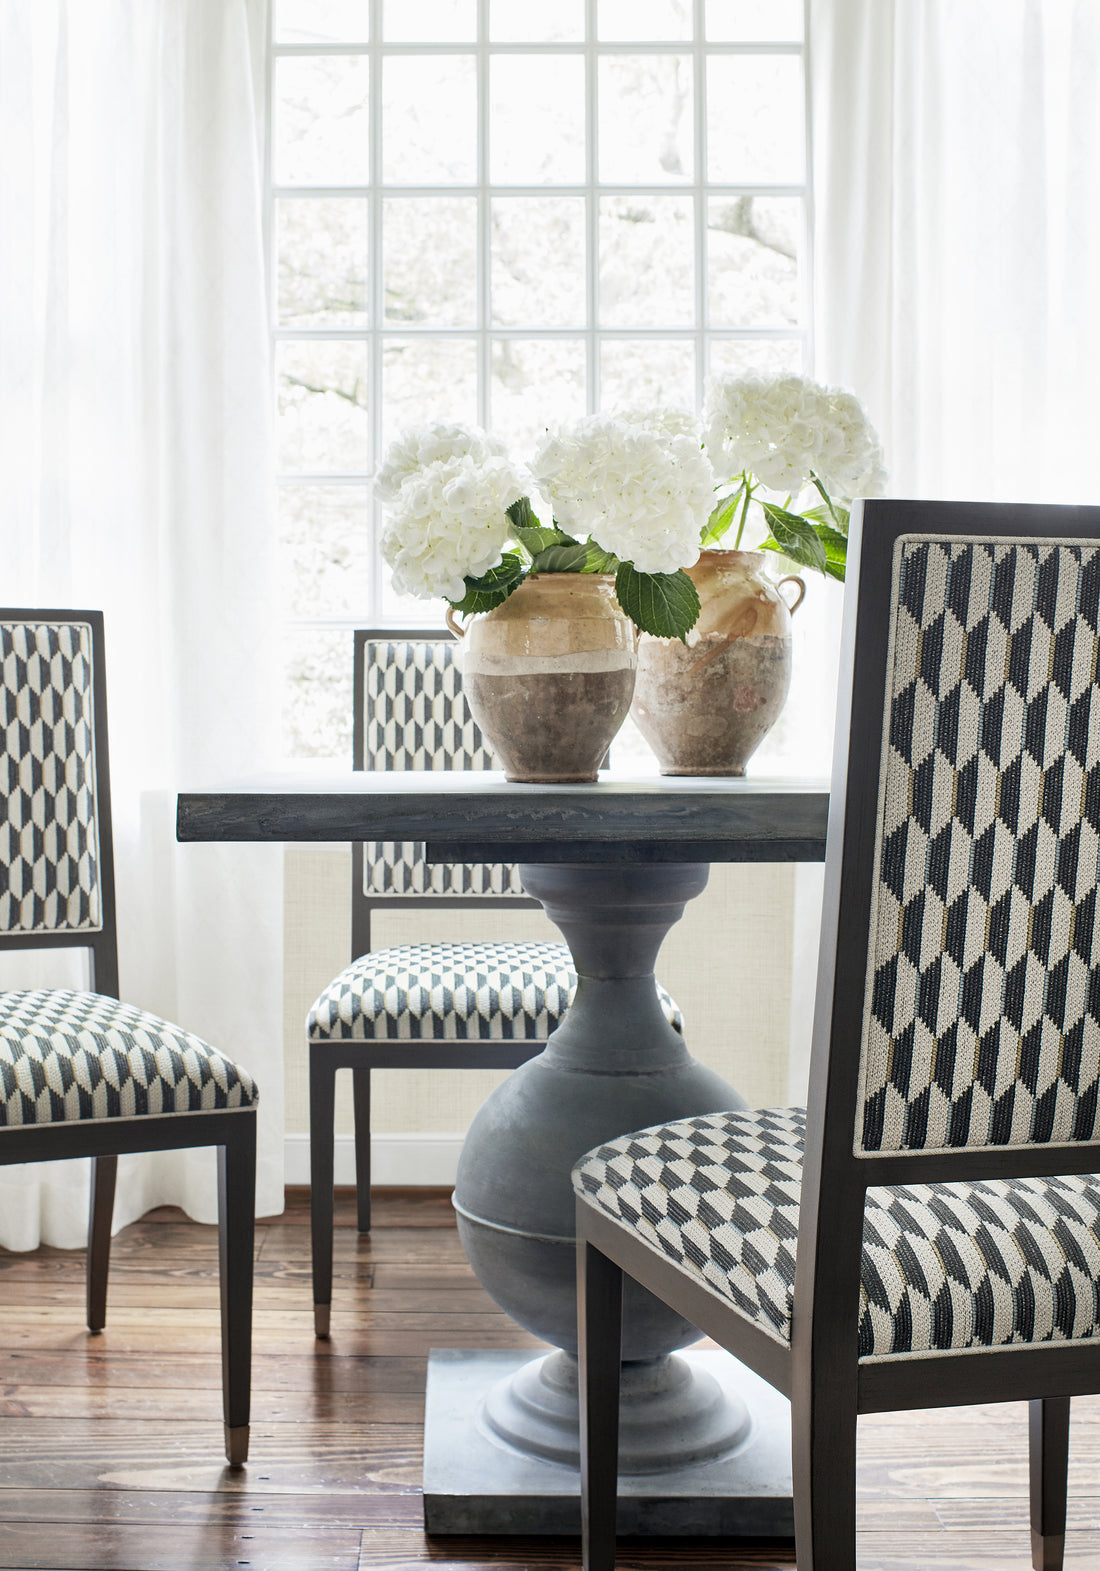 Lauderdale Dining Chair in Optica woven fabric in charcoal color - pattern number W73353 by Thibaut in the Nomad collection